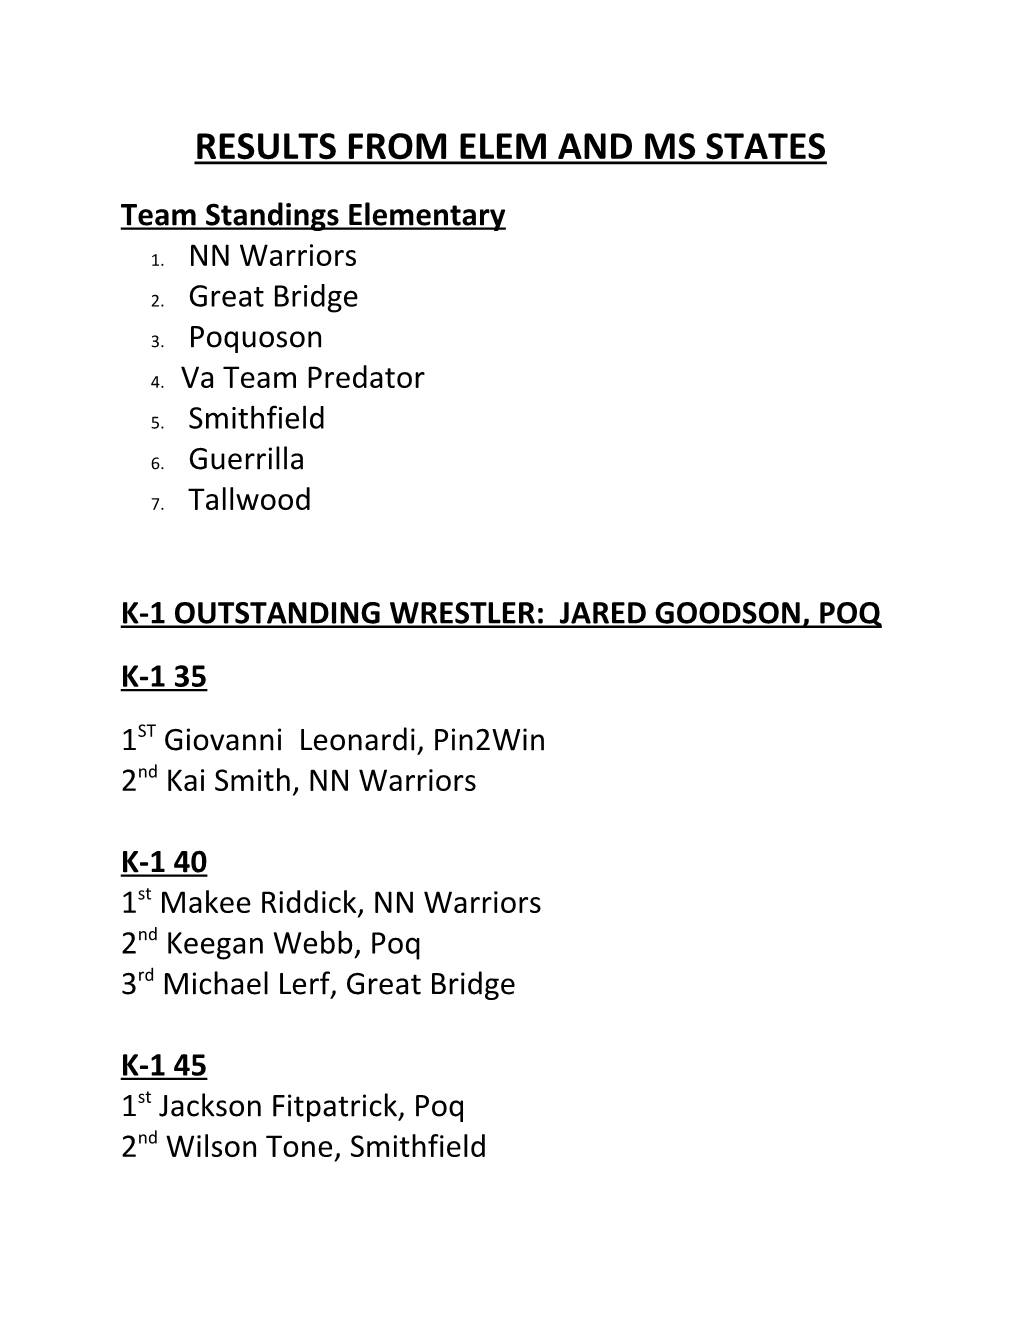 Results from Elem and Ms States